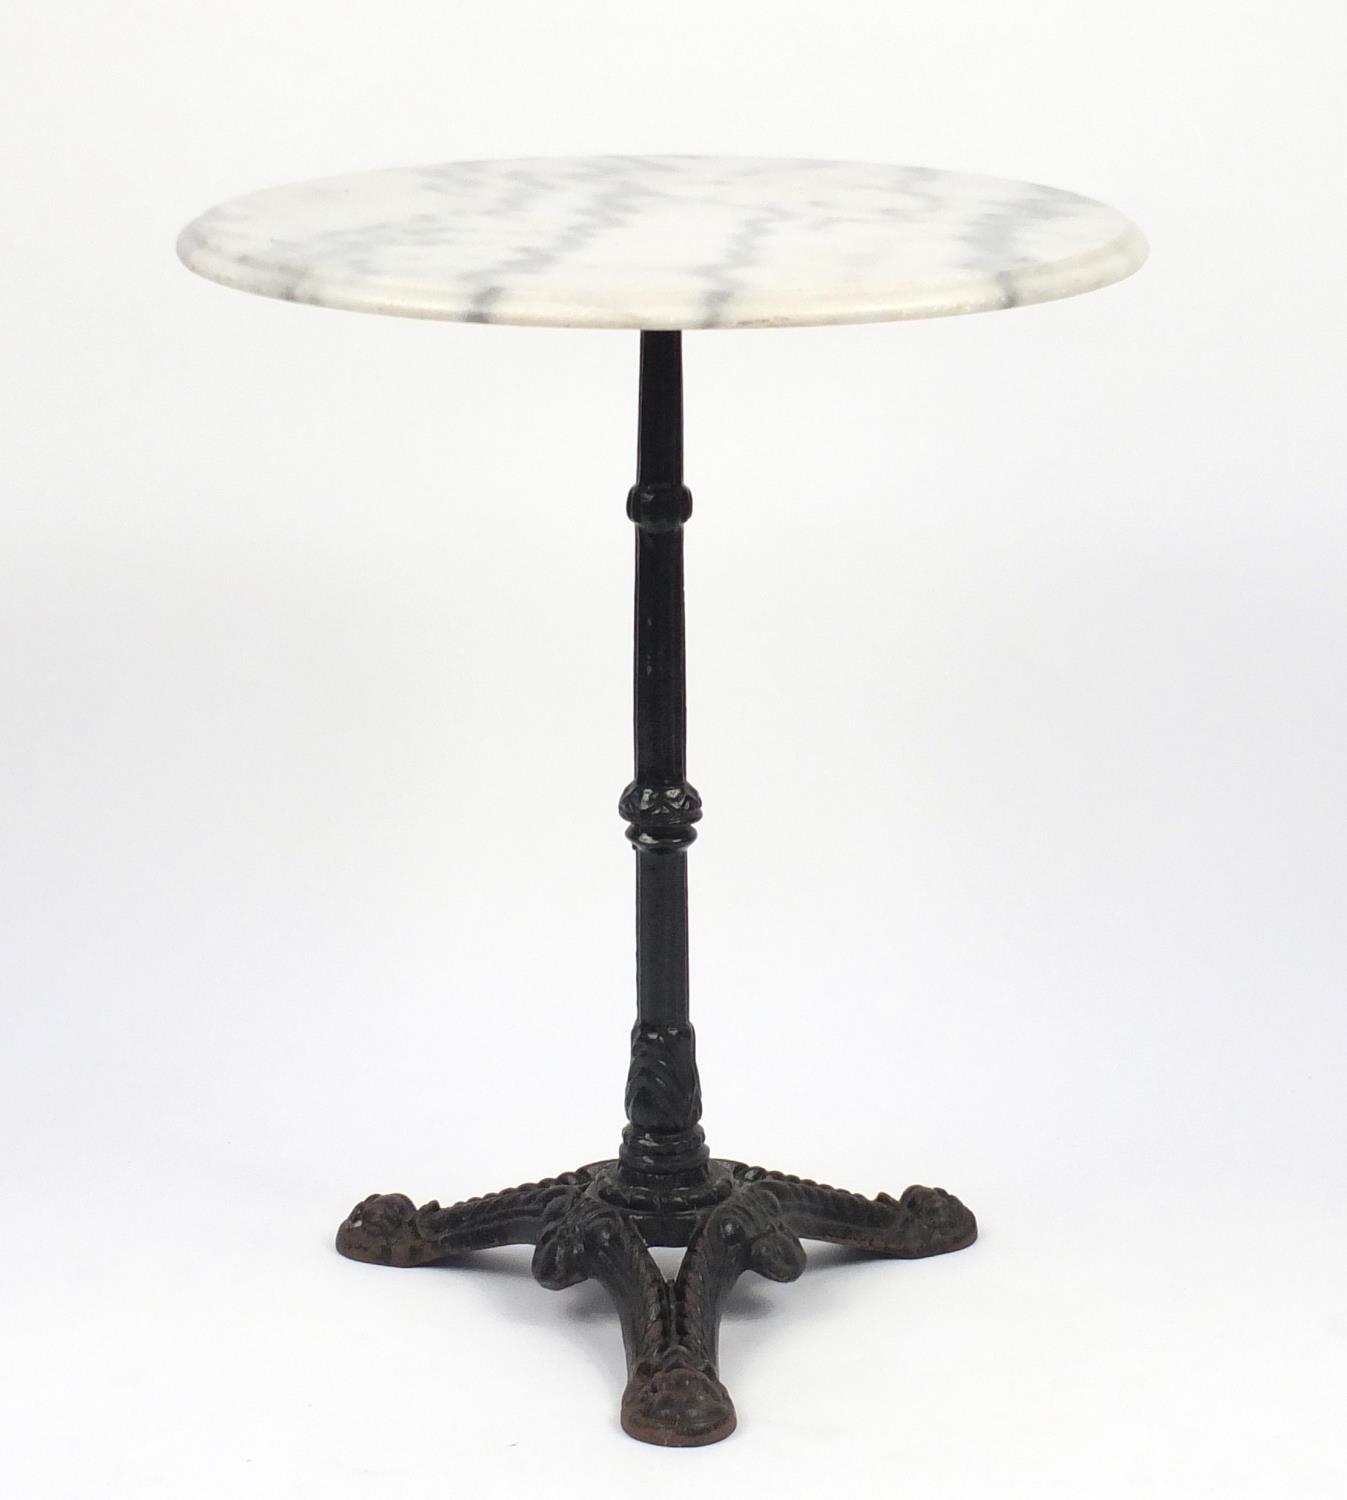 Circular white marble topped garden table with cast iron base, 72cm H x 60cm in diameter : For - Image 4 of 4